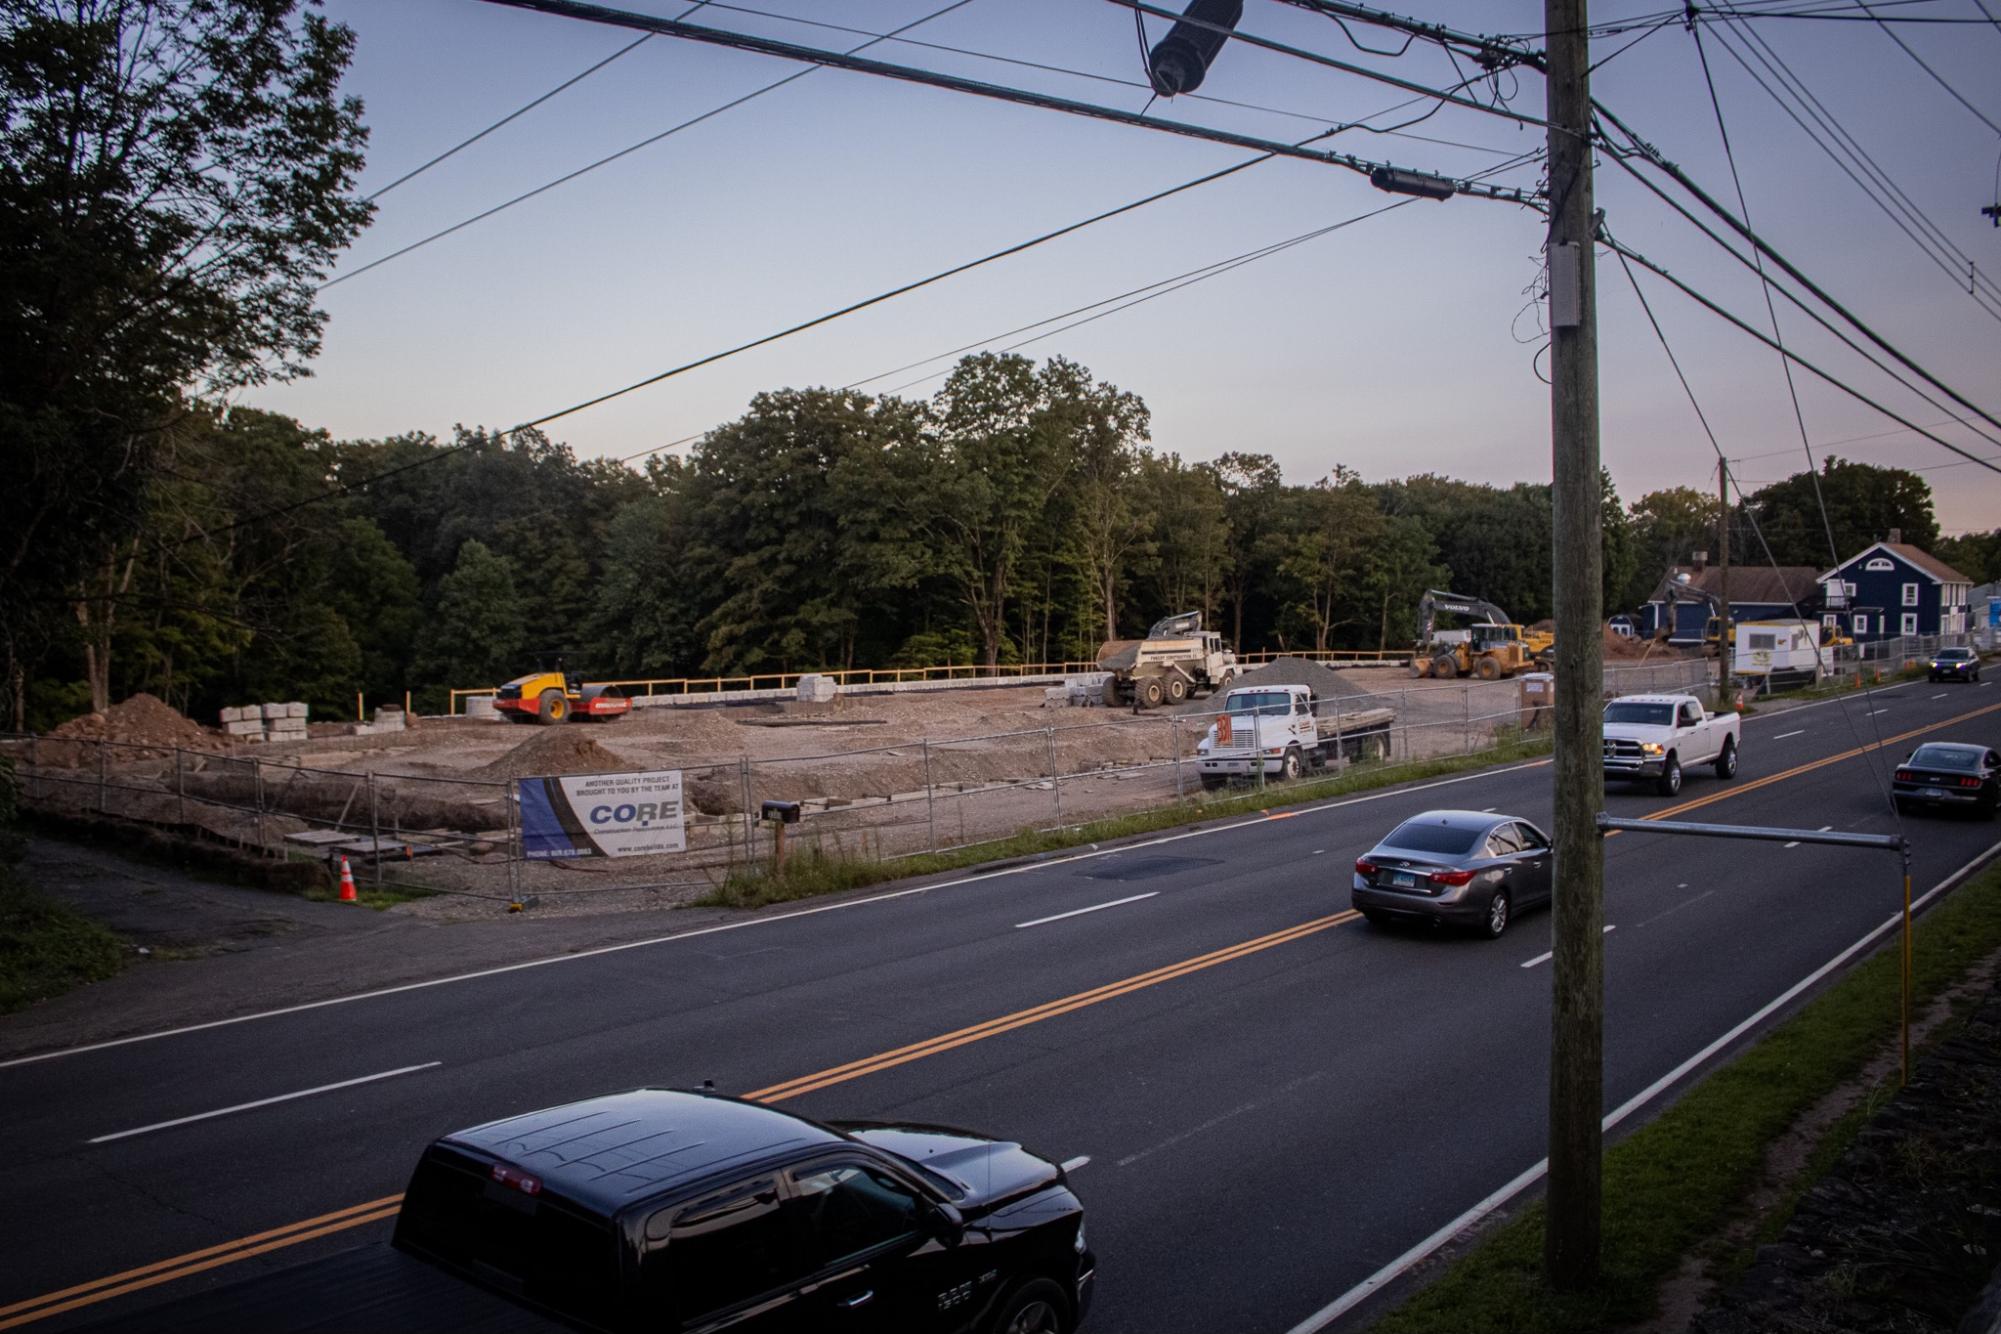 12 new residential apartments, convenience store and fueling station coming to Hamden